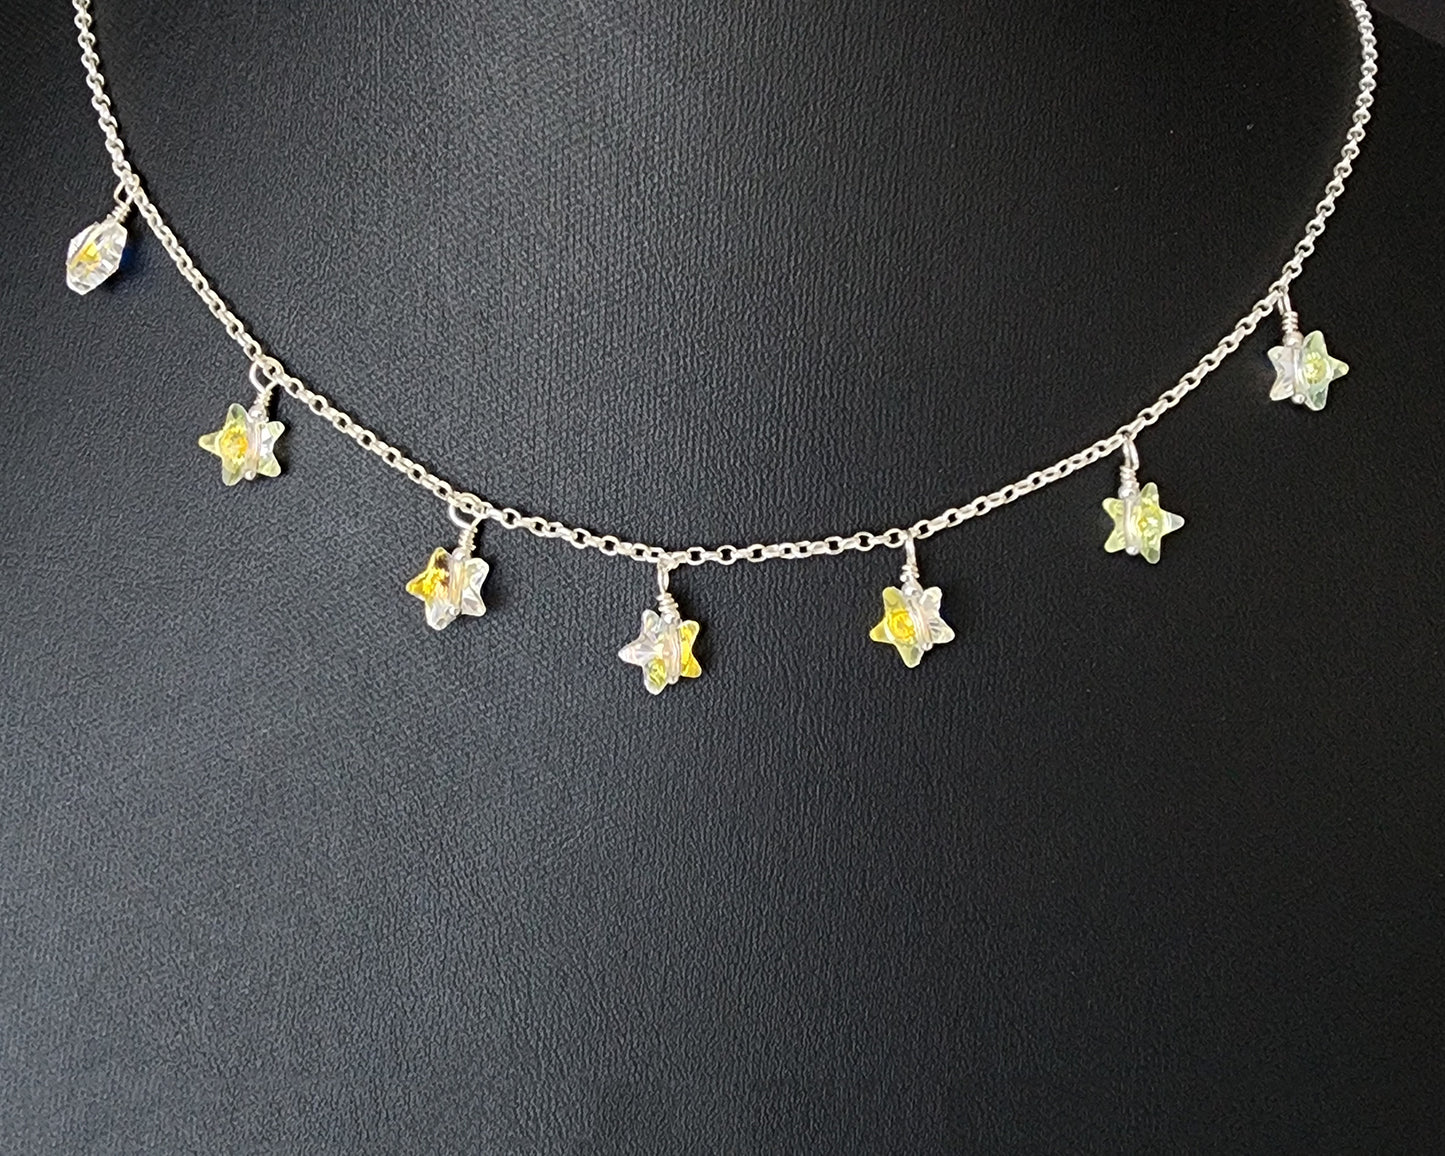 Brilliant Seven Stars Crystal Dangle Necklace with seven clear AB Austrian Crystal Stars on Sterling Silver chain.  